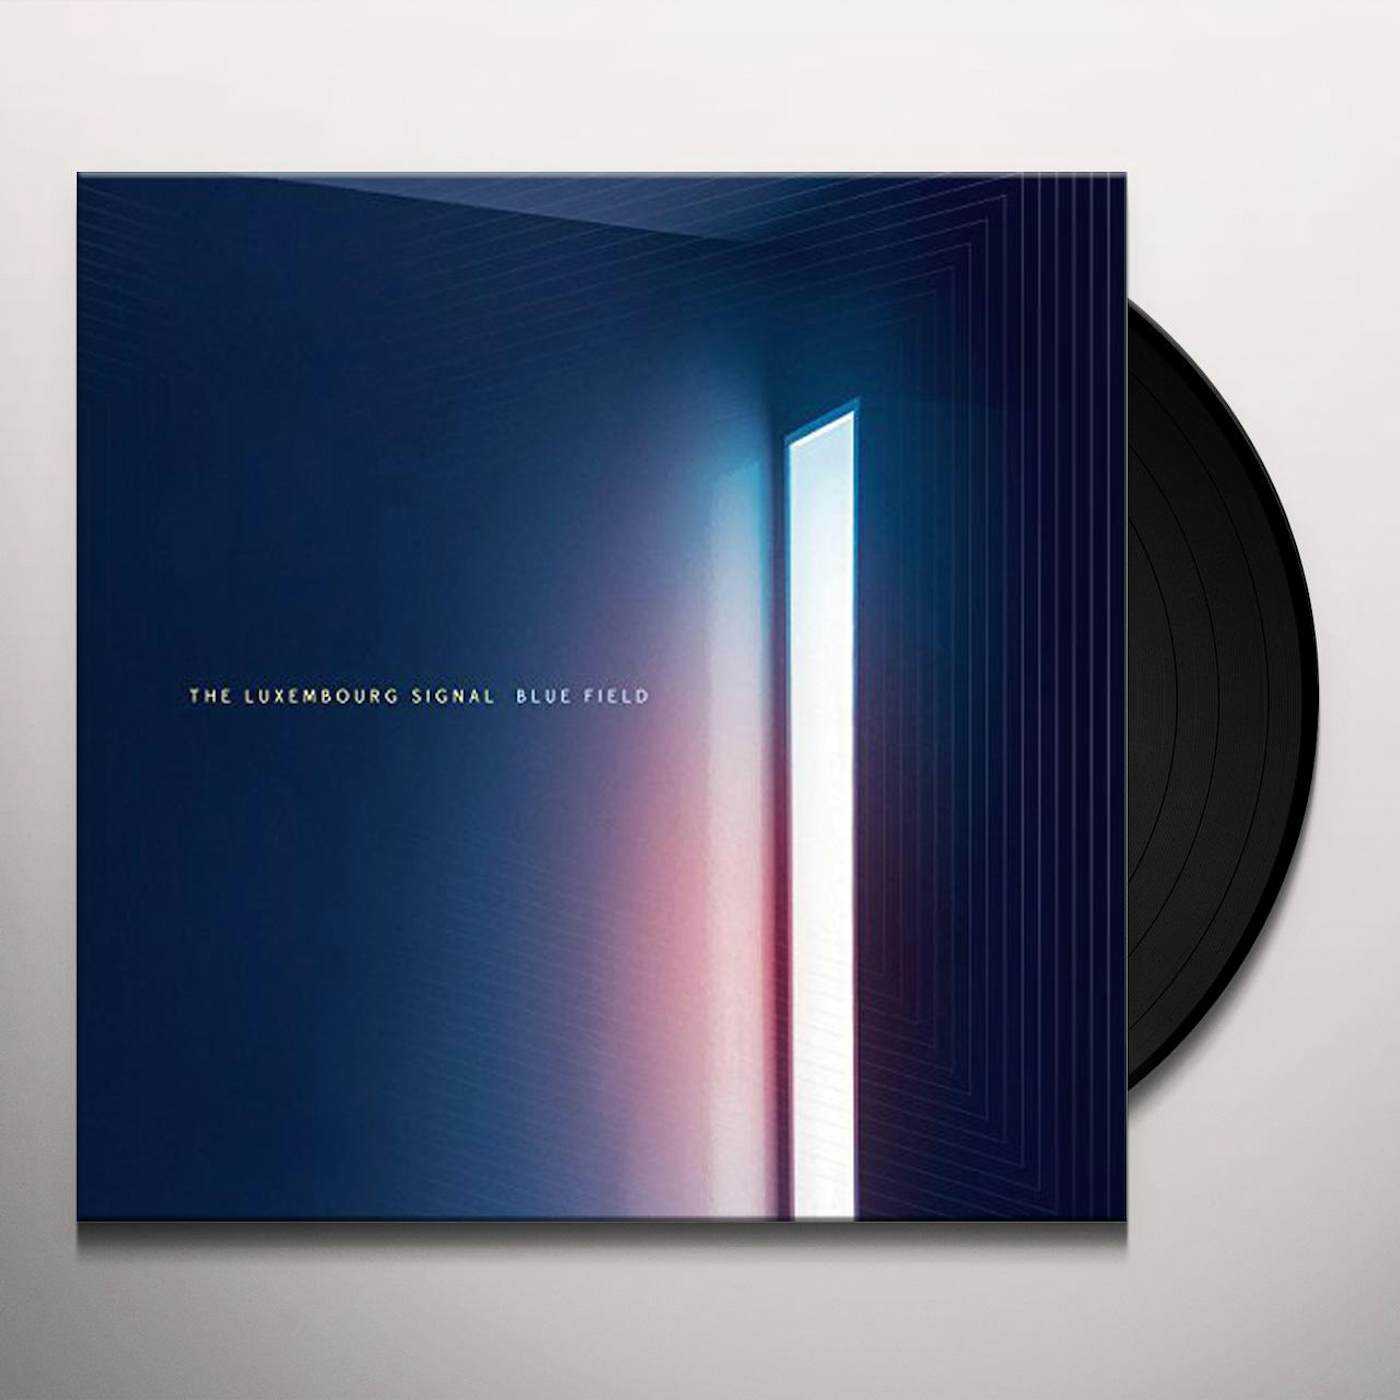 The Luxembourg Signal Blue Field Vinyl Record